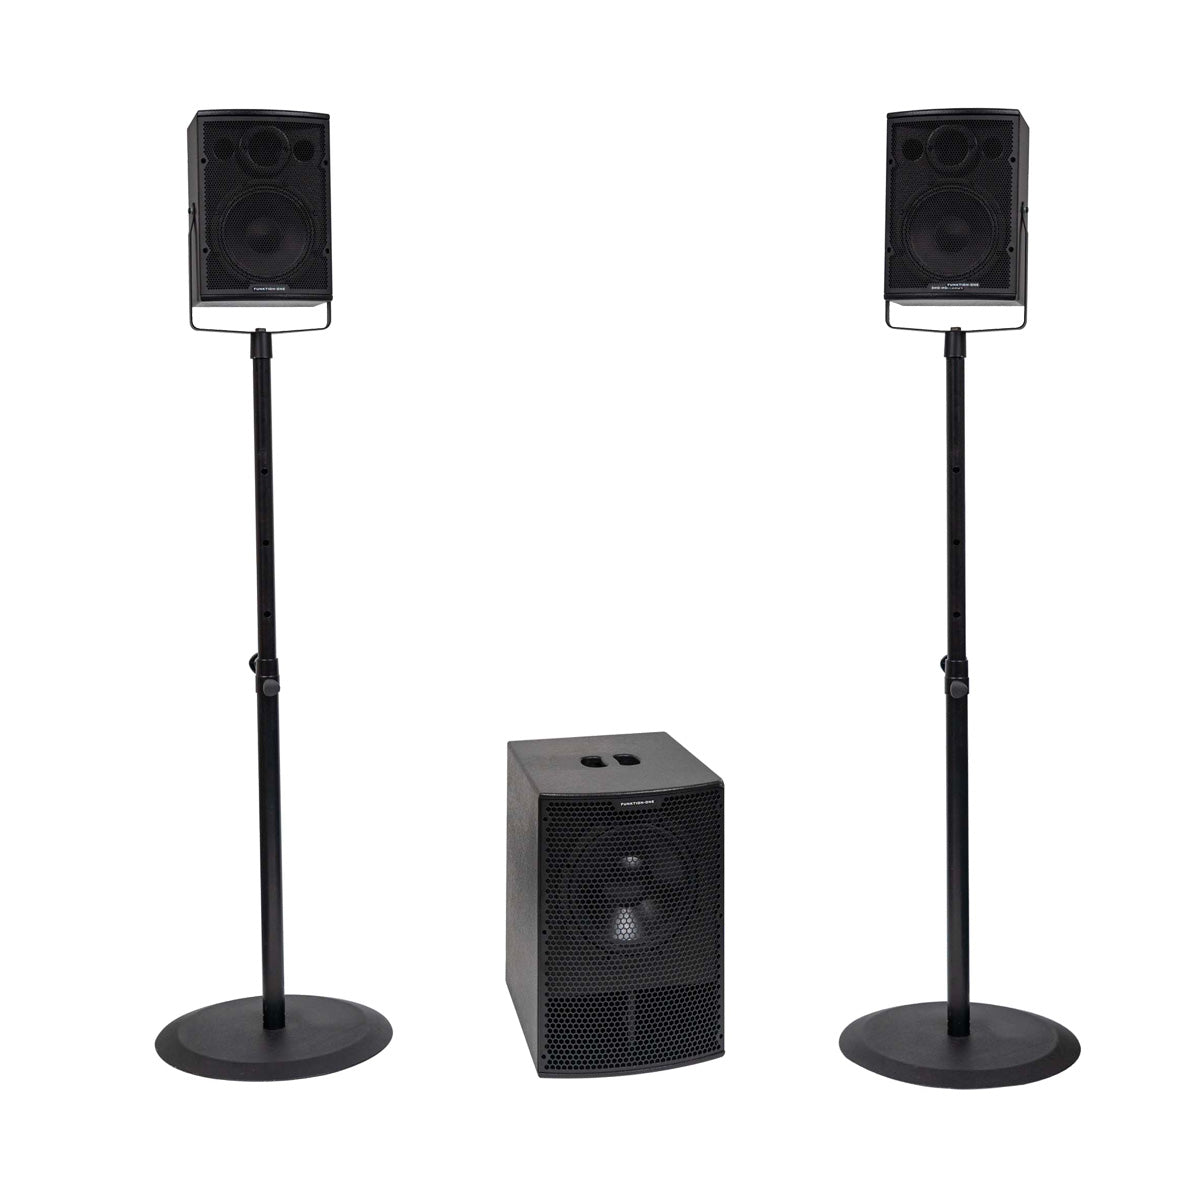 Music speaker bass box - Event Hire in London